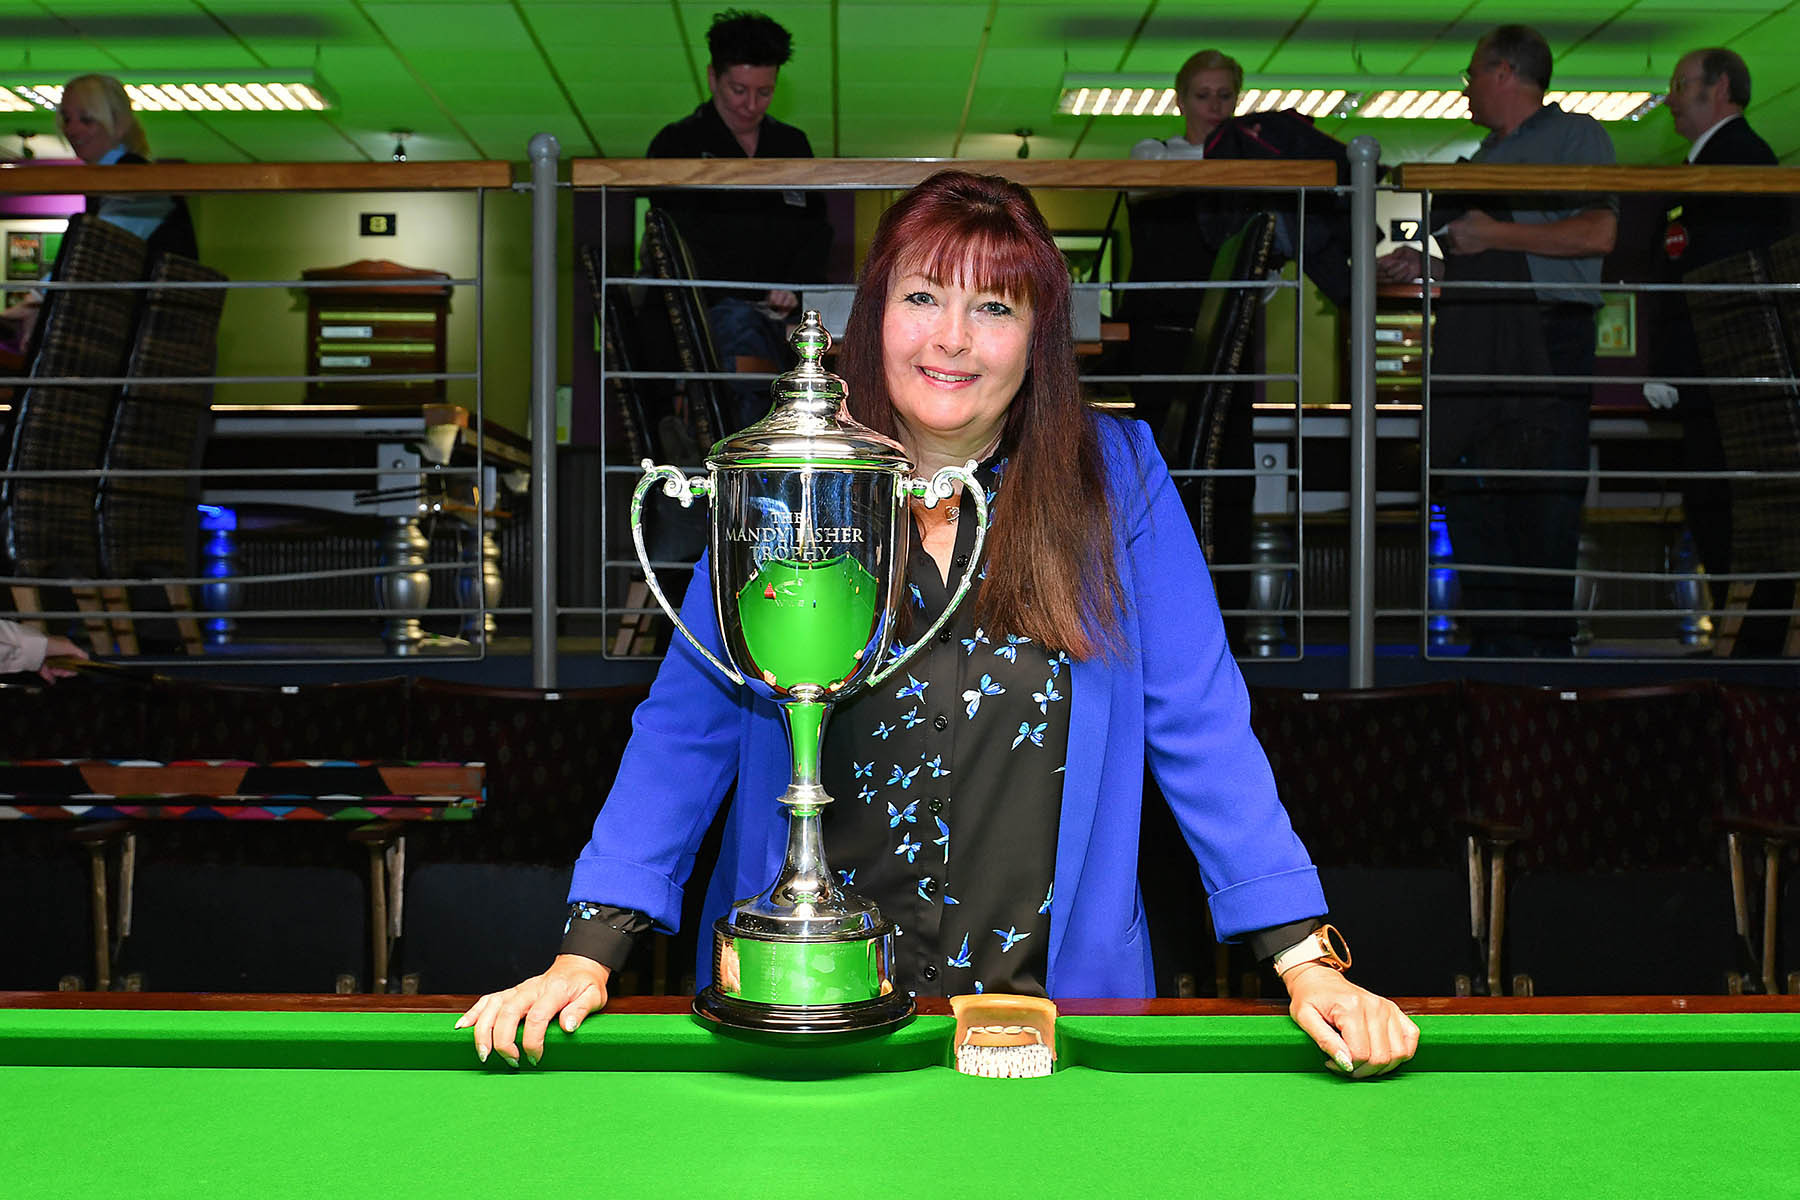 The renamed Mandy Fisher Trophy is up for grabs at the World Women's Snooker Championship ©World Women’s Snooker 